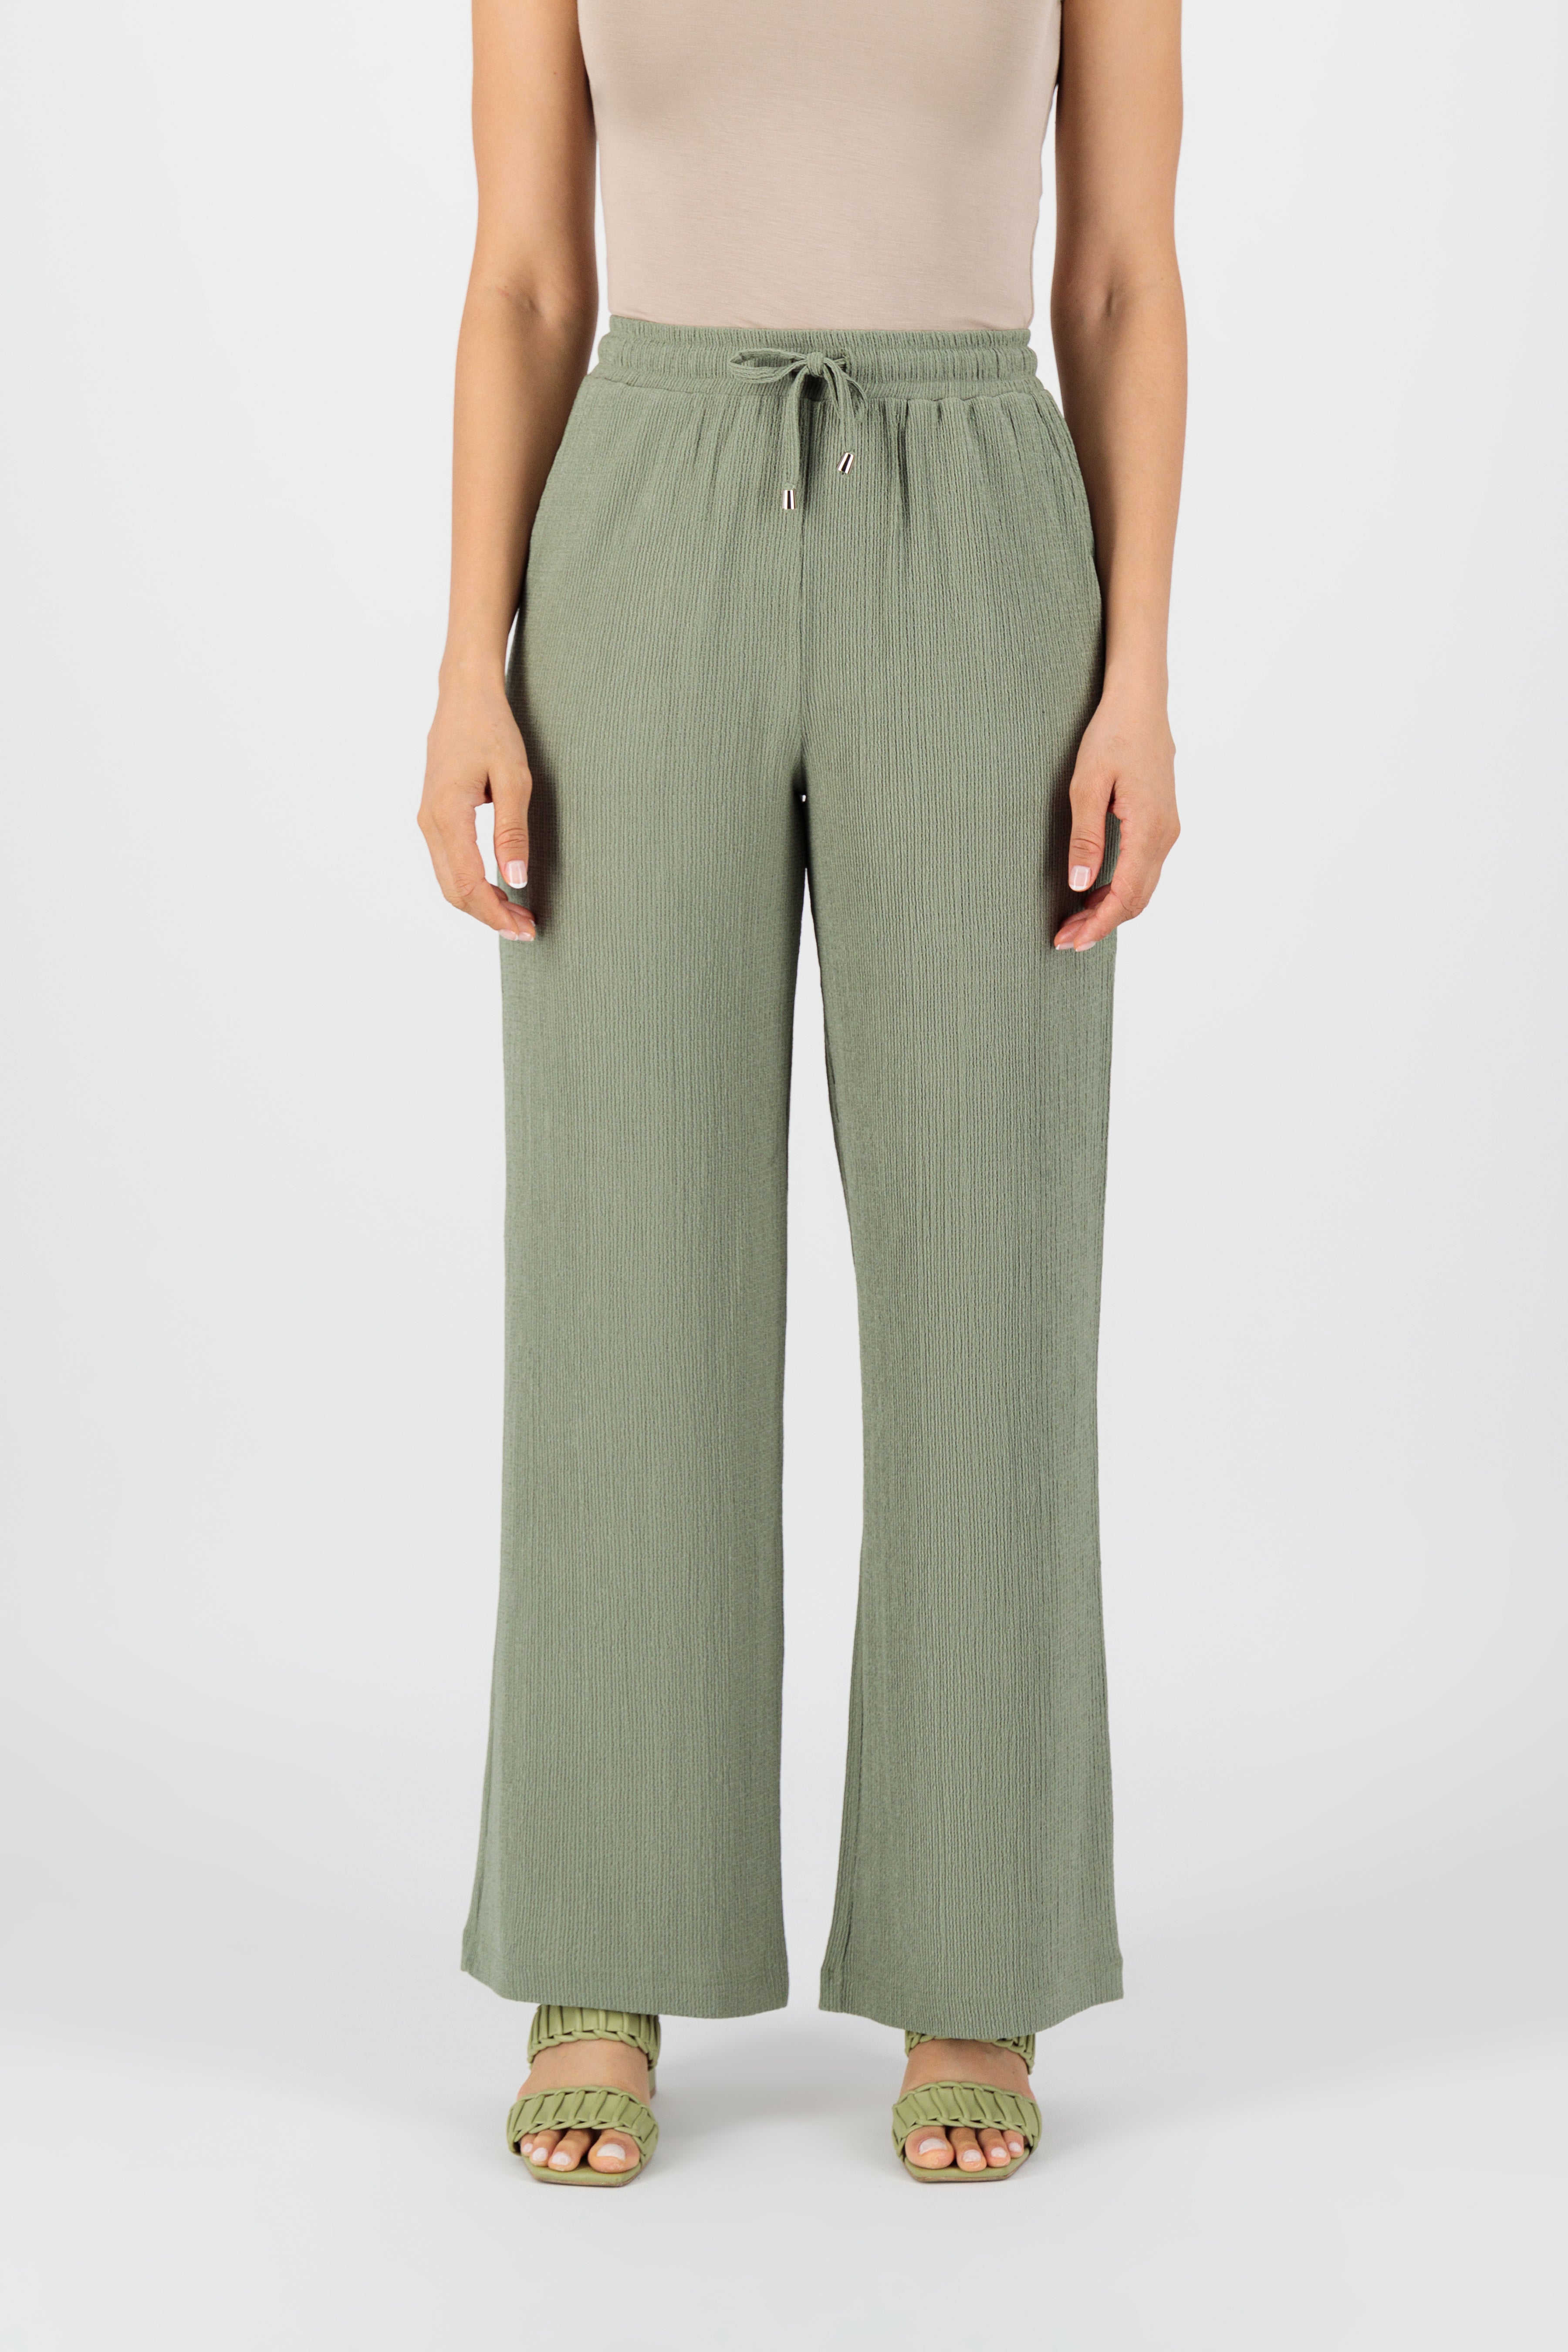 CA - Relaxed Fit Pants - Olive